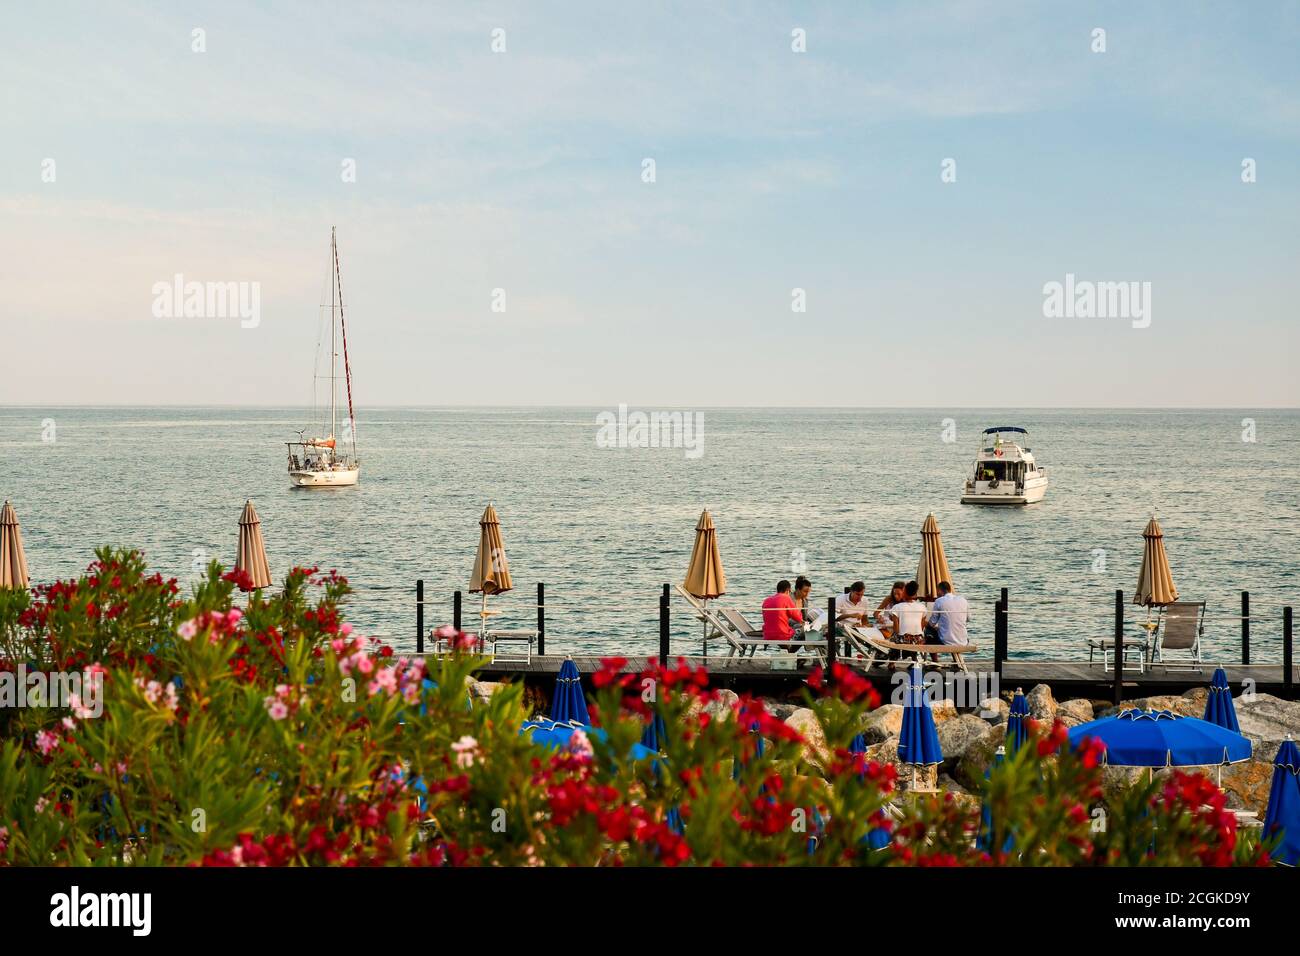 Group of young people having dinner sitting on deck chairs on a wooden pier on the sea shore with flowering oleander trees, Lerici, La Spezia, Italy Stock Photo